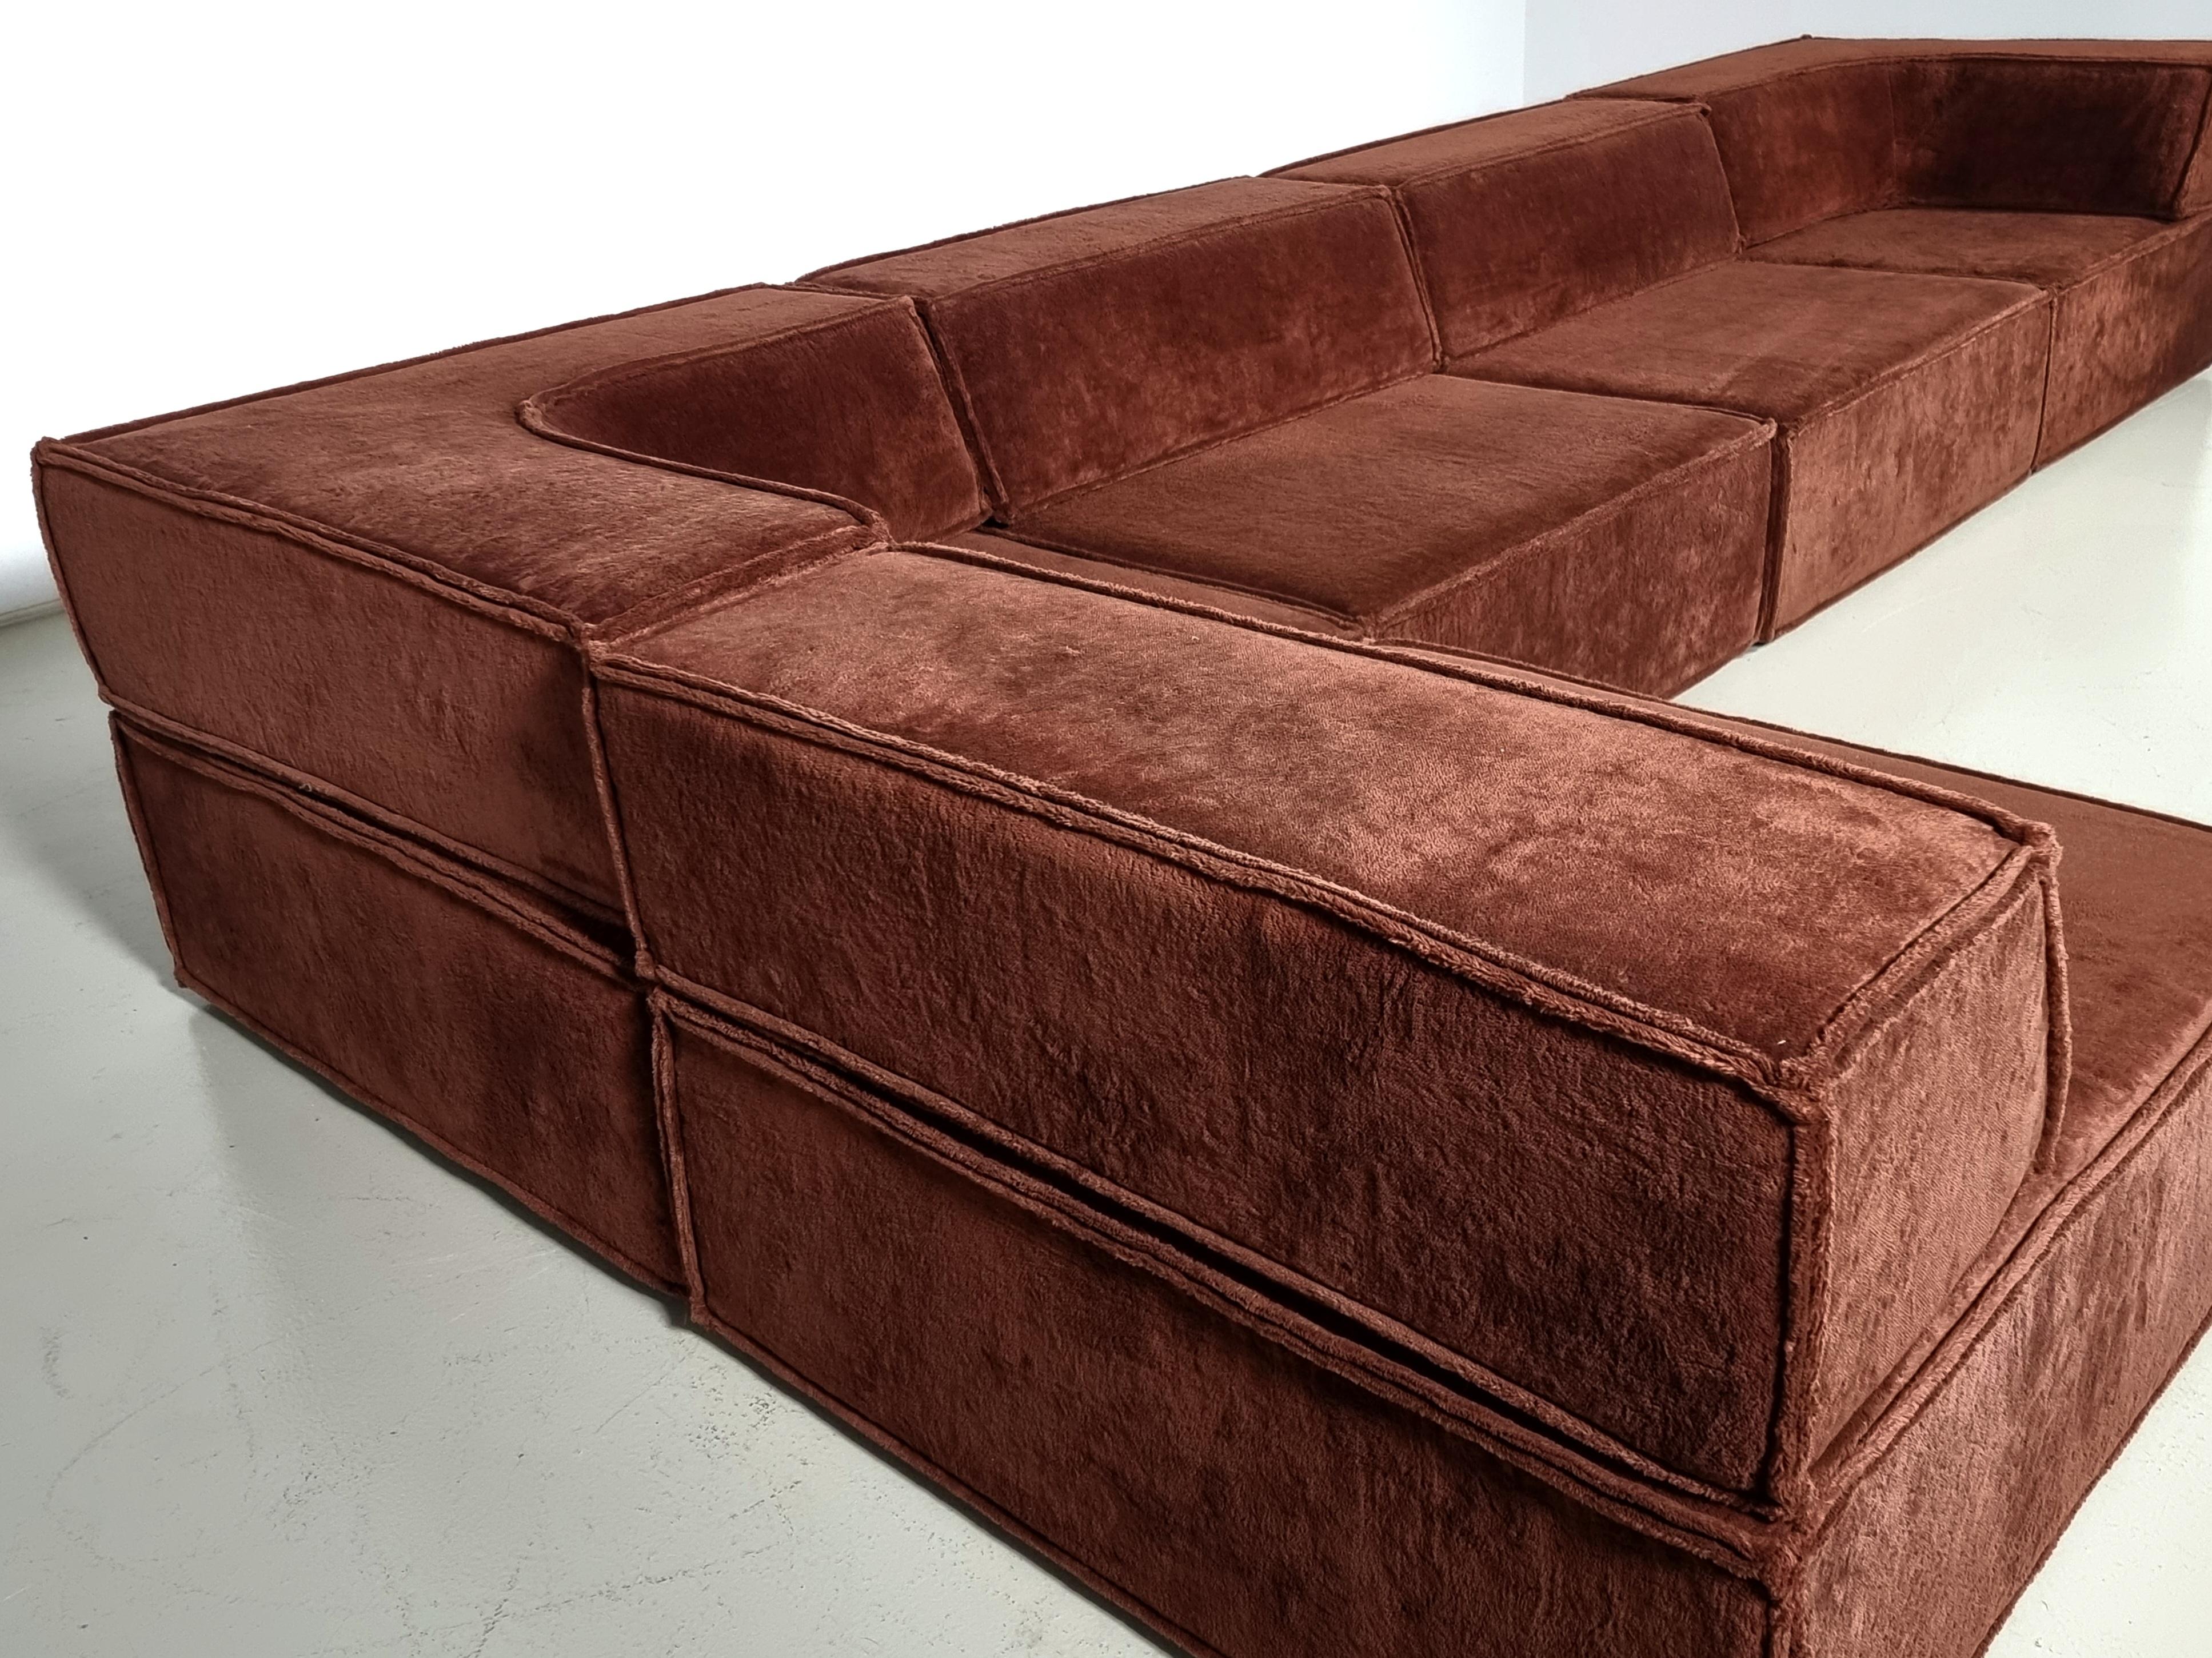 COR Trio Sofa by Team Form Ag in brown original fabric, COR Furniture, Germany 3